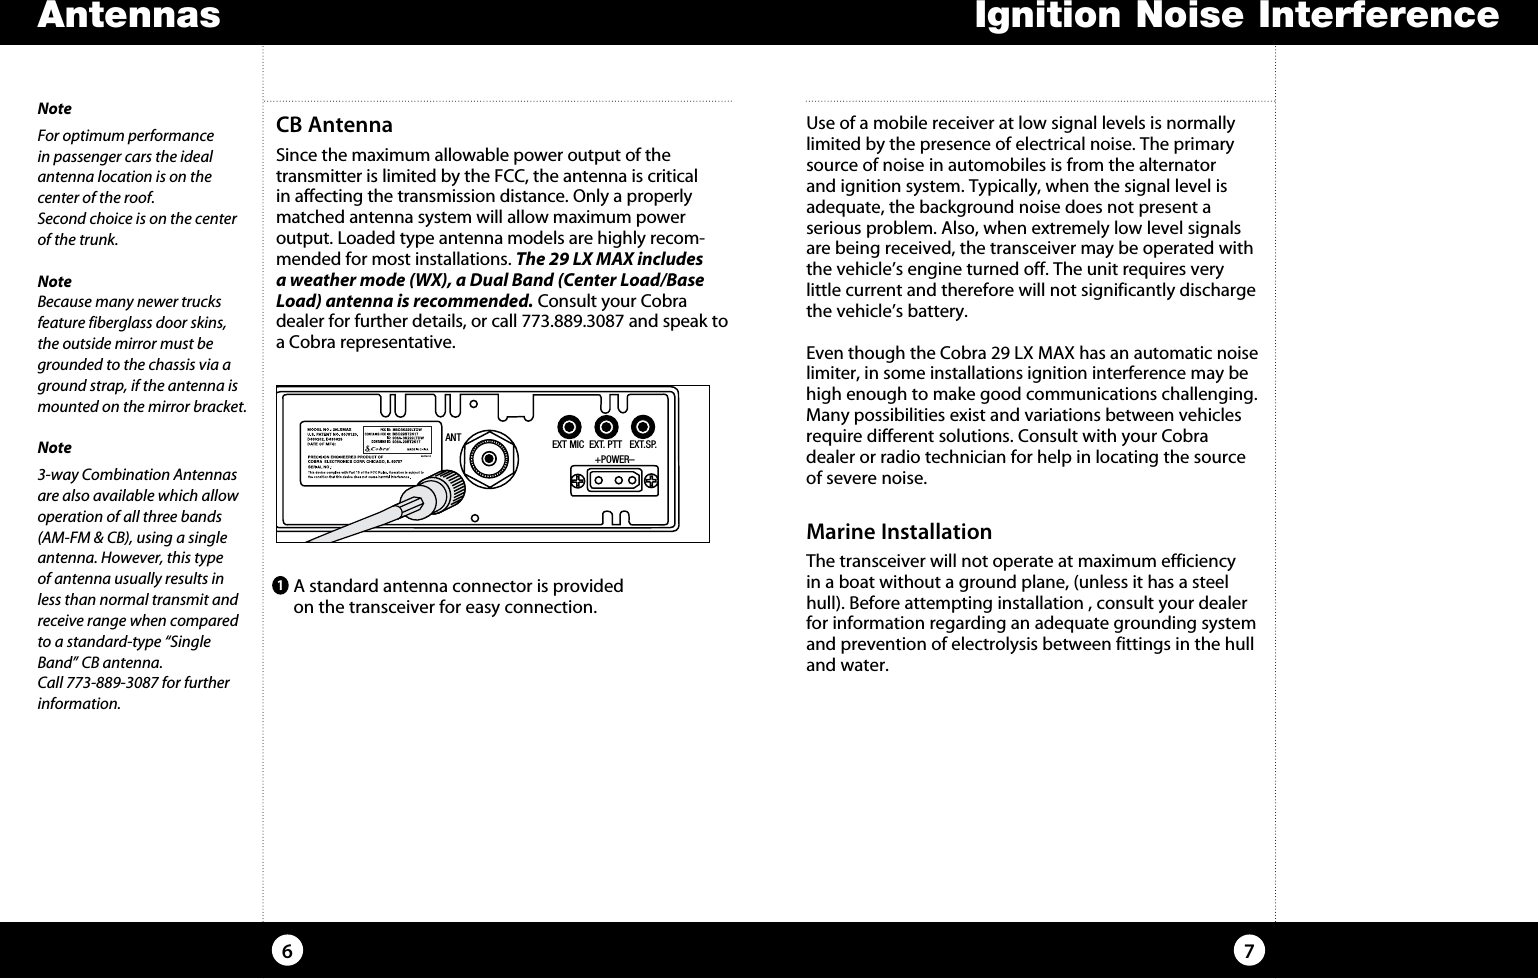 ANT EXT MIC  EXT. PTT   EXT.SP.                 +POWER–Ignition Noise InterferenceAntennasUse of a mobile receiver at low signal levels is normally limited by the presence of electrical noise. The primary source of noise in automobiles is from the alternator and ignition system. Typically, when the signal level is adequate, the background noise does not present a  serious problem. Also, when extremely low level signals are being received, the transceiver may be operated with the vehicle’s engine turned off. The unit requires very little current and therefore will not significantly discharge the vehicle’s battery.Even though the Cobra 29 LX MAX has an automatic noise limiter, in some installations ignition interference may be high enough to make good communications challenging. Many possibilities exist and variations between vehicles require different solutions. Consult with your Cobra dealer or radio technician for help in locating the source of severe noise.Marine InstallationThe transceiver will not operate at maximum efficiency in a boat without a ground plane, (unless it has a steel hull). Before attempting installation , consult your dealer for information regarding an adequate grounding system and prevention of electrolysis between fittings in the hull and water. CB AntennaSince the maximum allowable power output of the transmitter is limited by the FCC, the antenna is critical in affecting the transmission distance. Only a properly matched antenna system will allow maximum power output. Loaded type antenna models are highly recom-mended for most installations. The 29 LX MAX includes a weather mode (WX), a Dual Band (Center Load/Base Load) antenna is recommended. Consult your Cobra dealer for further details, or call 773.889.3087 and speak to a Cobra representative. 7NoteFor optimum performance  in passenger cars the ideal antenna location is on the  center of the roof.  Second choice is on the center of the trunk.NoteBecause many newer trucks  feature fiberglass door skins,  the outside mirror must be grounded to the chassis via a ground strap, if the antenna is mounted on the mirror bracket.Note3-way Combination Antennas are also available which allow operation of all three bands (AM-FM &amp; CB), using a single antenna. However, this type of antenna usually results in less than normal transmit and receive range when compared to a standard-type “Single Band” CB antenna.  Call 773-889-3087 for further information.61  A standard antenna connector is provided  on the transceiver for easy connection.